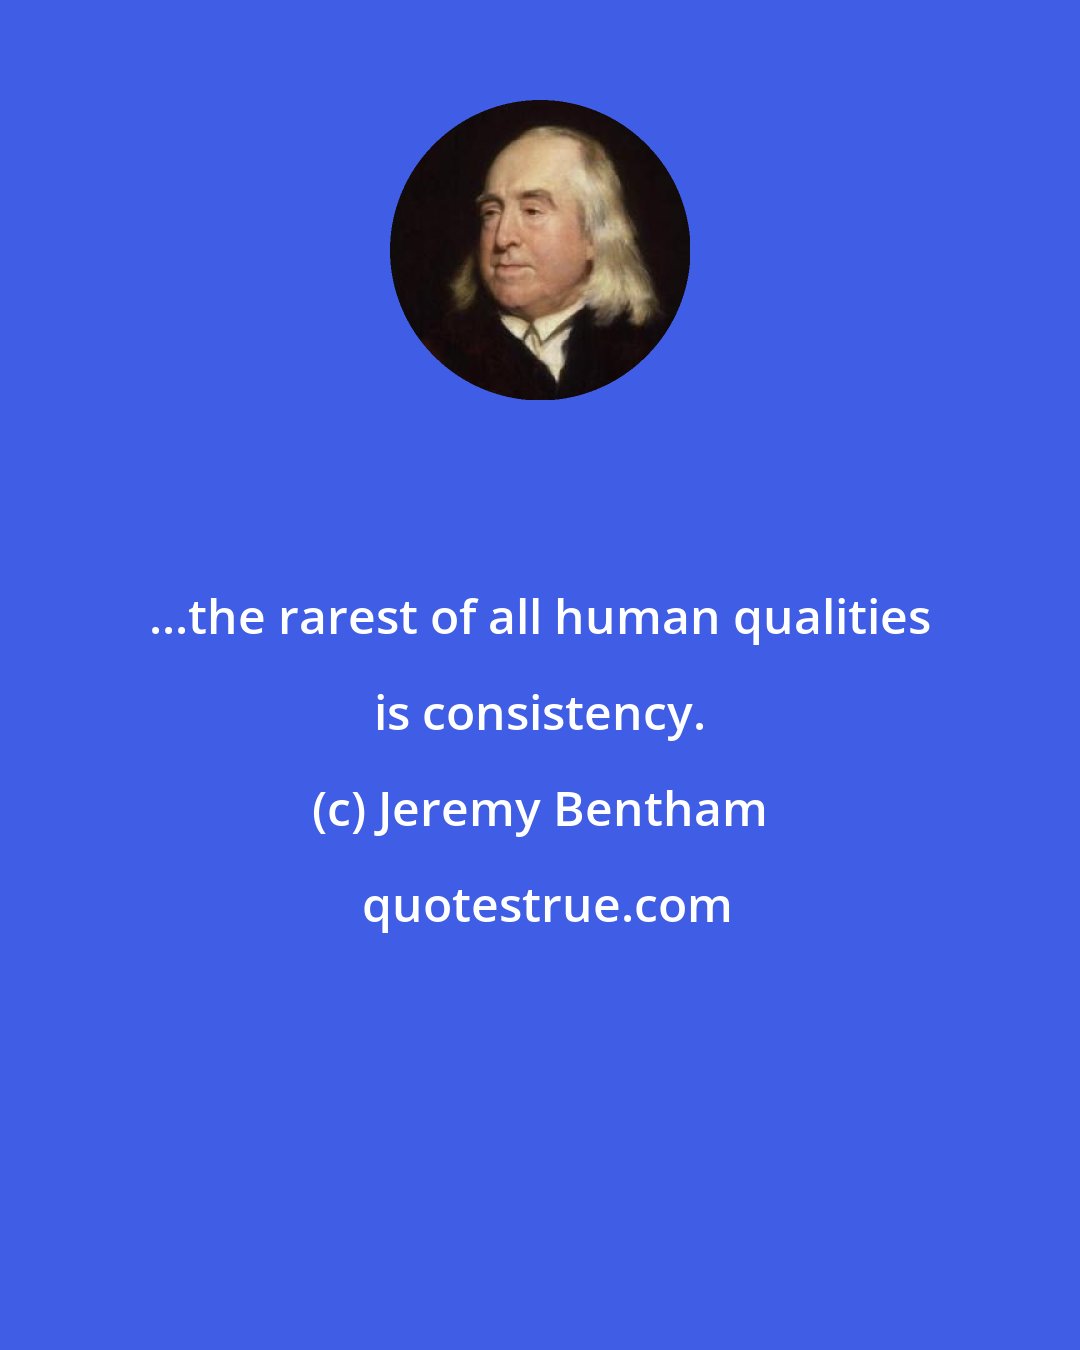 Jeremy Bentham: ...the rarest of all human qualities is consistency.